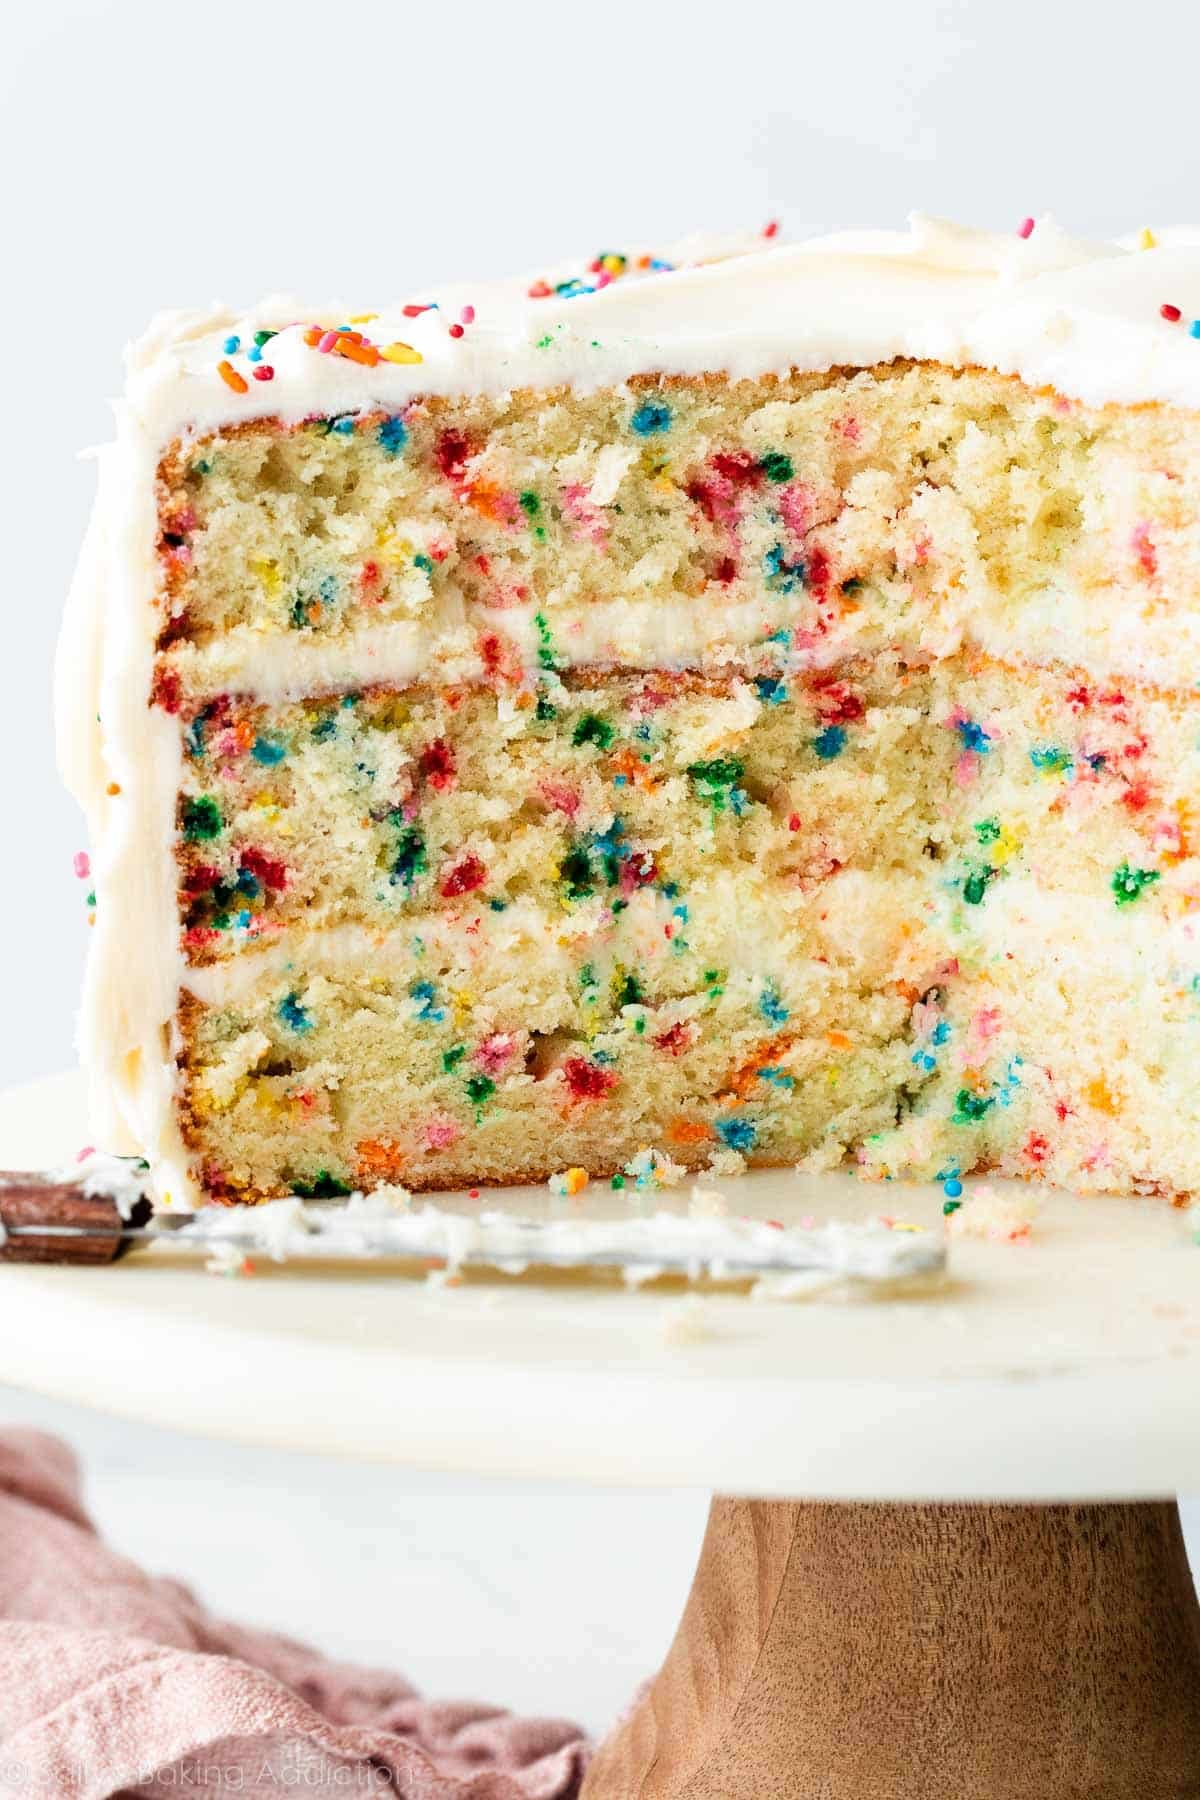 confetti birthday cake cut open to reveal sprinkle-loaded center.